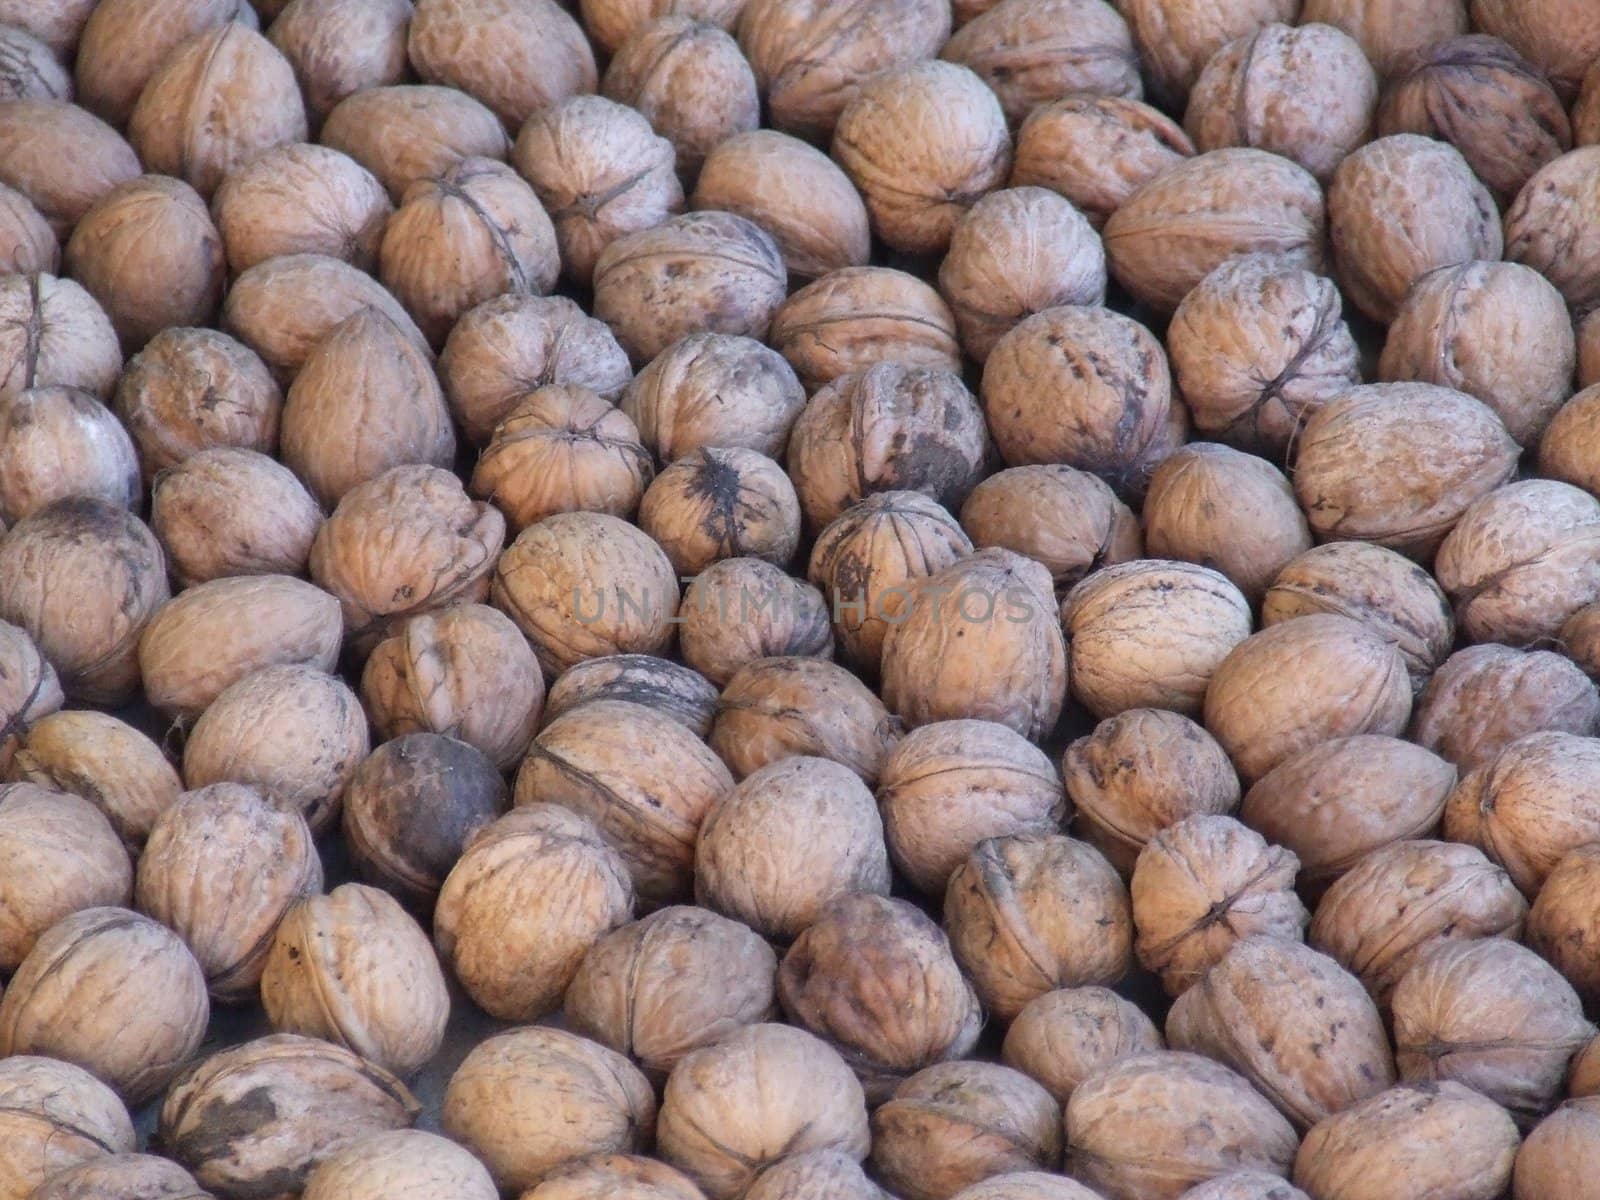 The photo shows the fruit of the walnut